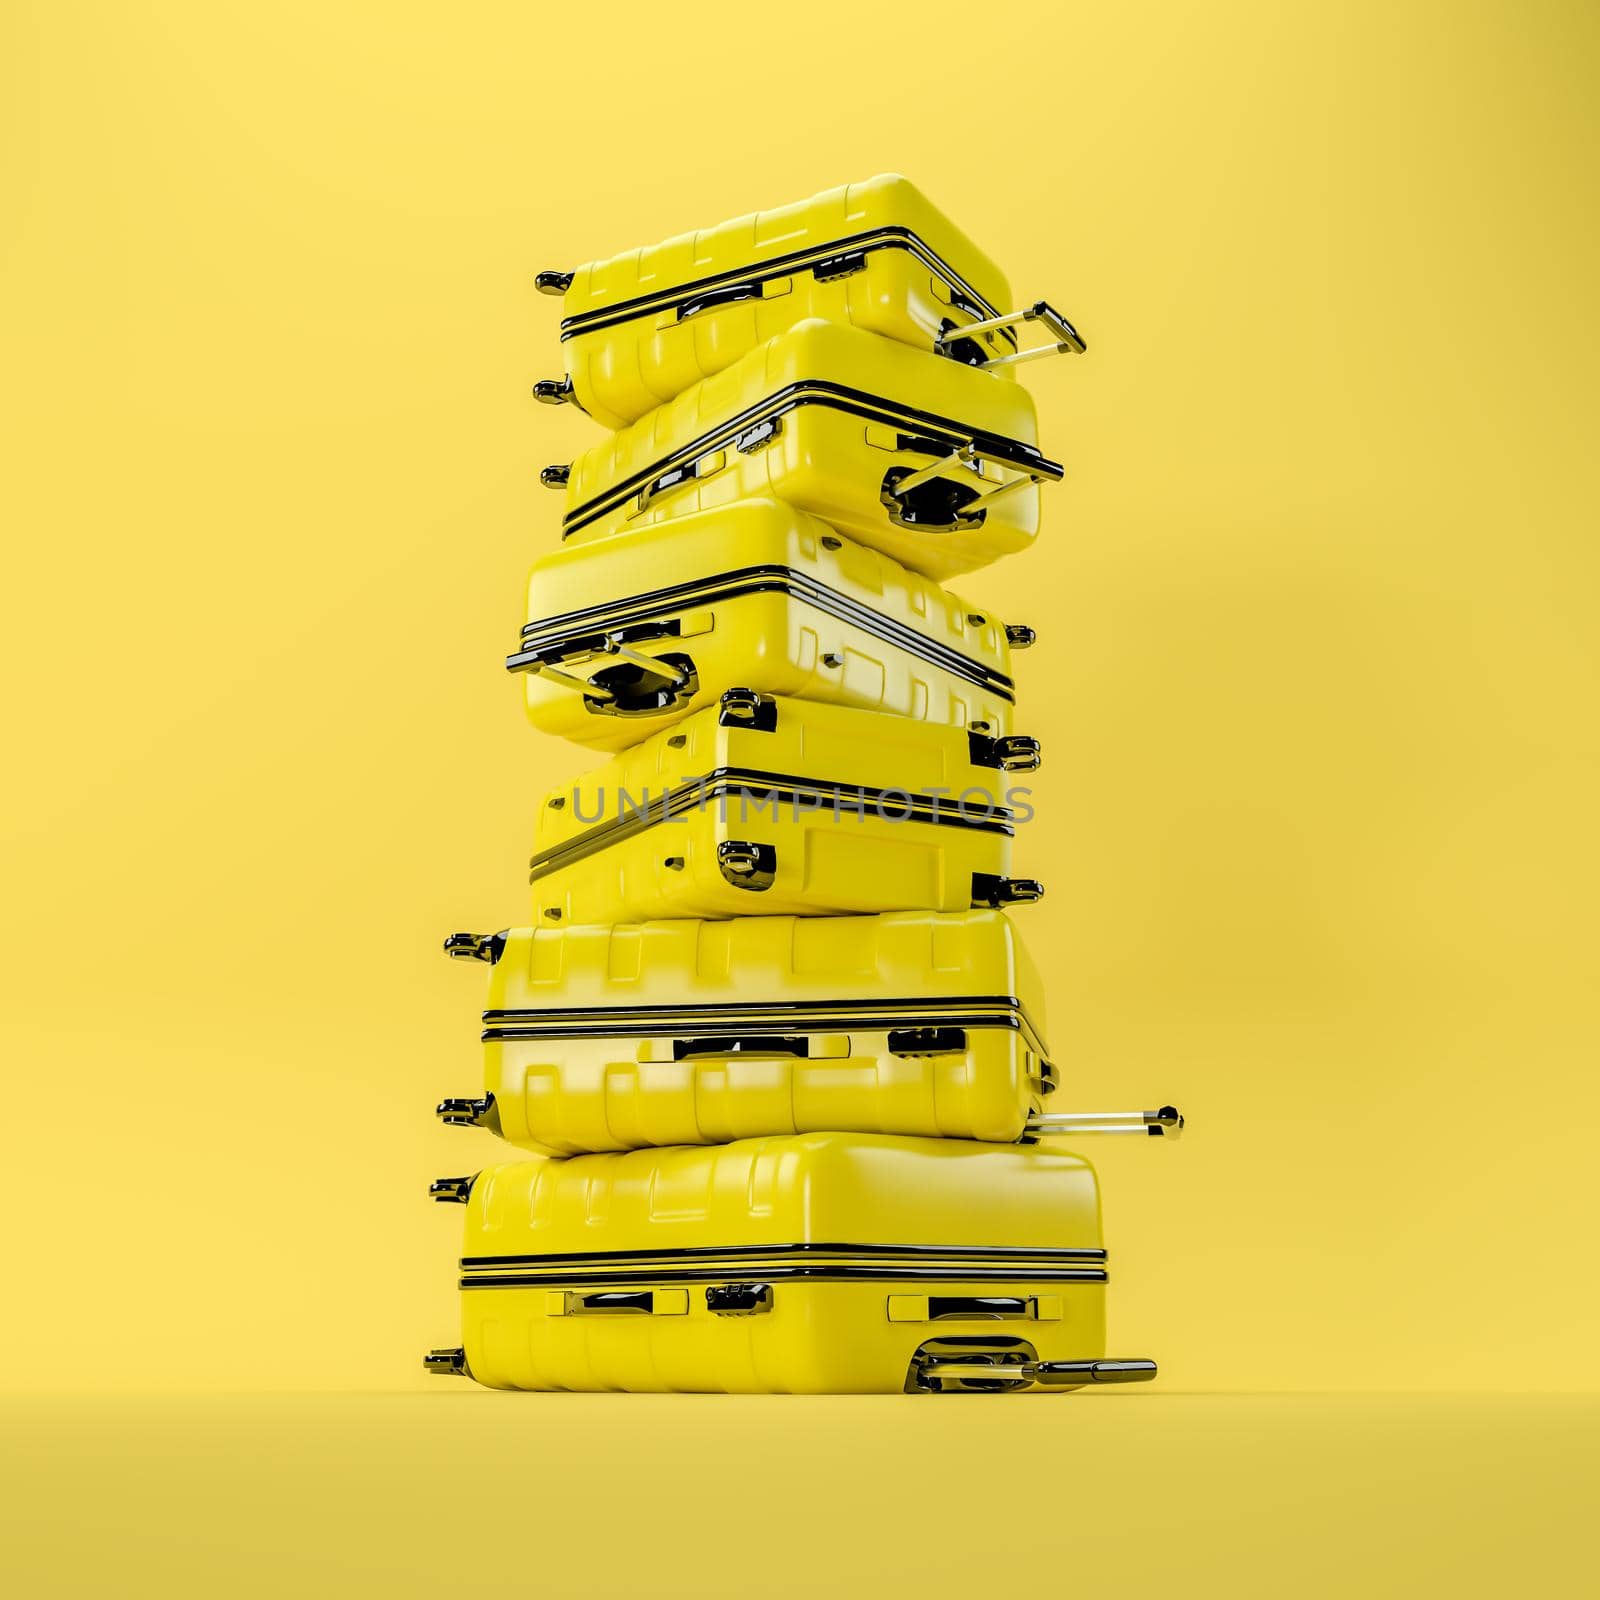 A stack of yellow travel suitcases on a yellow background, 3D rendering illustration.